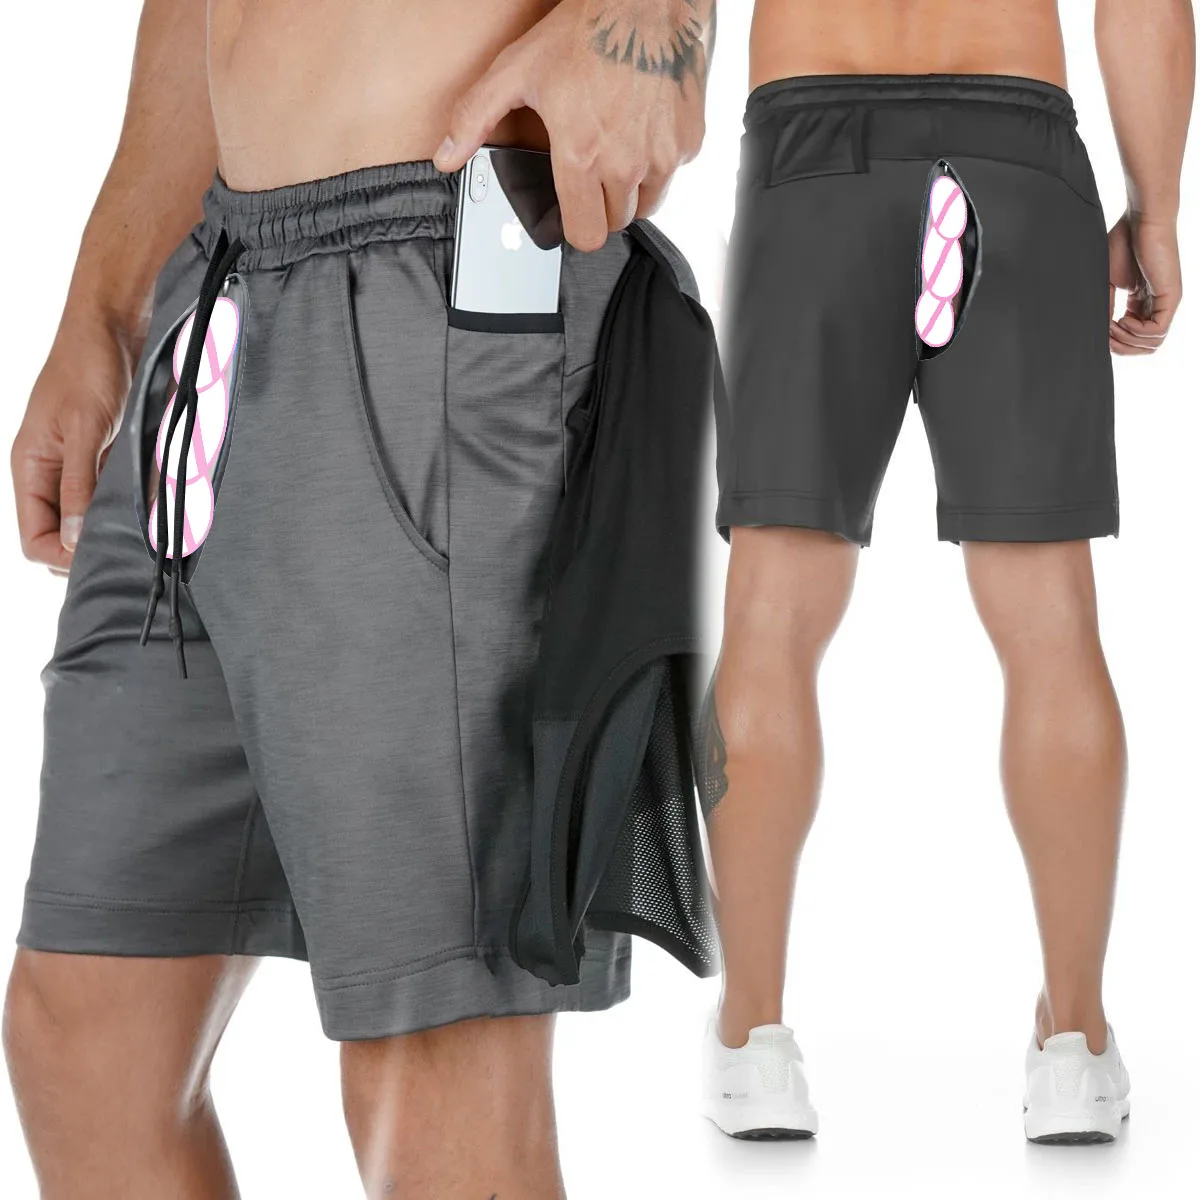 

Invisible Open Crotch Outdoor Sex Pants Summer Exercise Shorts Men's Quick-Drying Breathable Fitness Gym Trunks Sweatpants Short